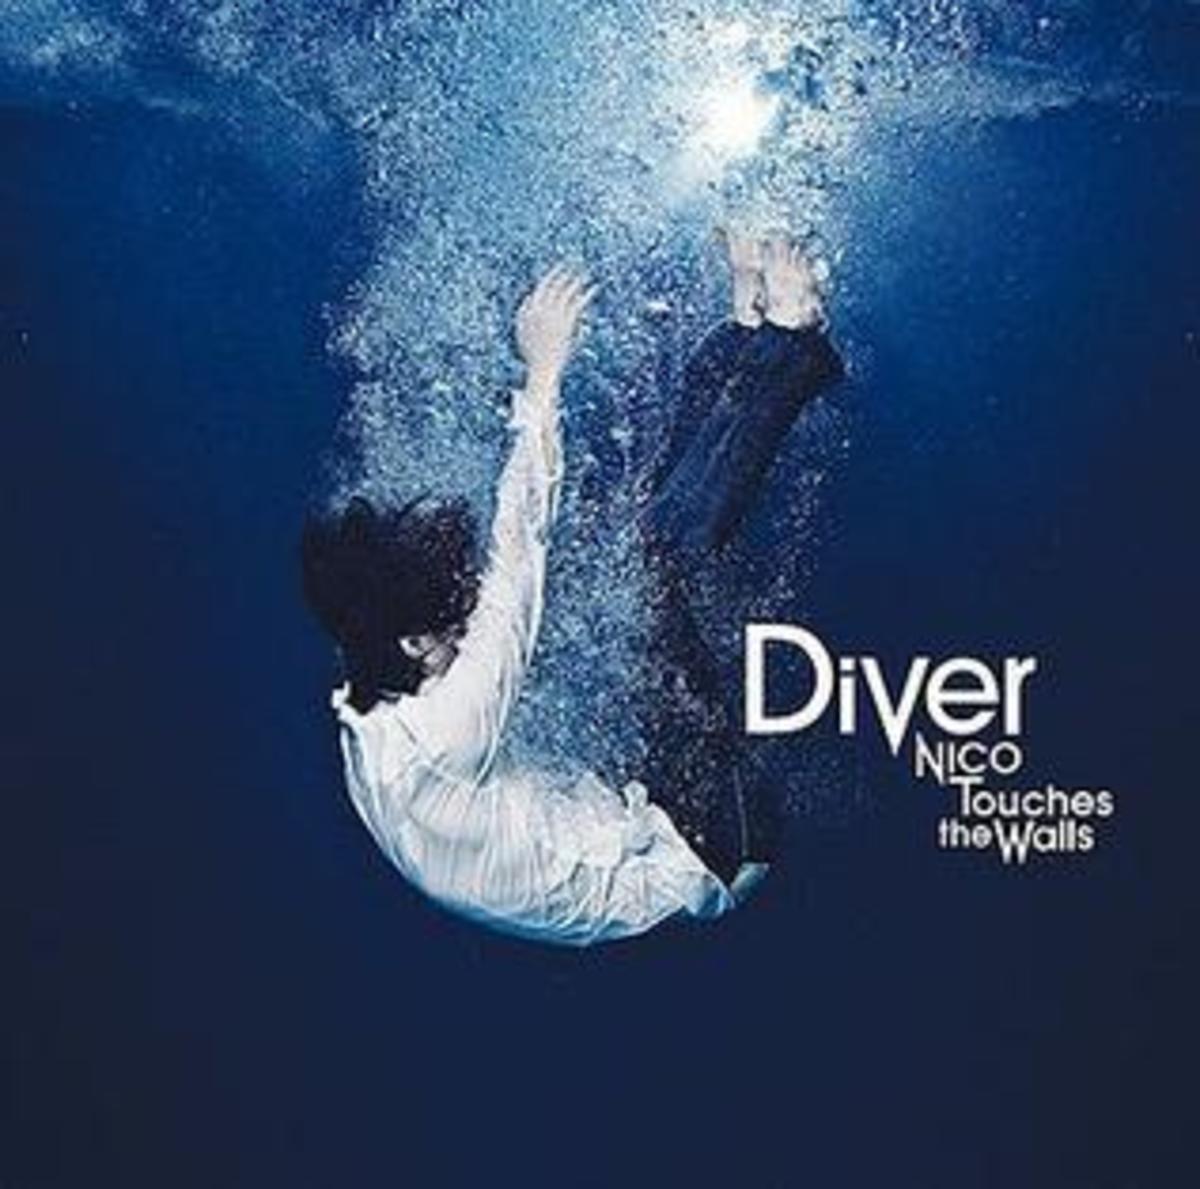 "Diver" was released in 2011.